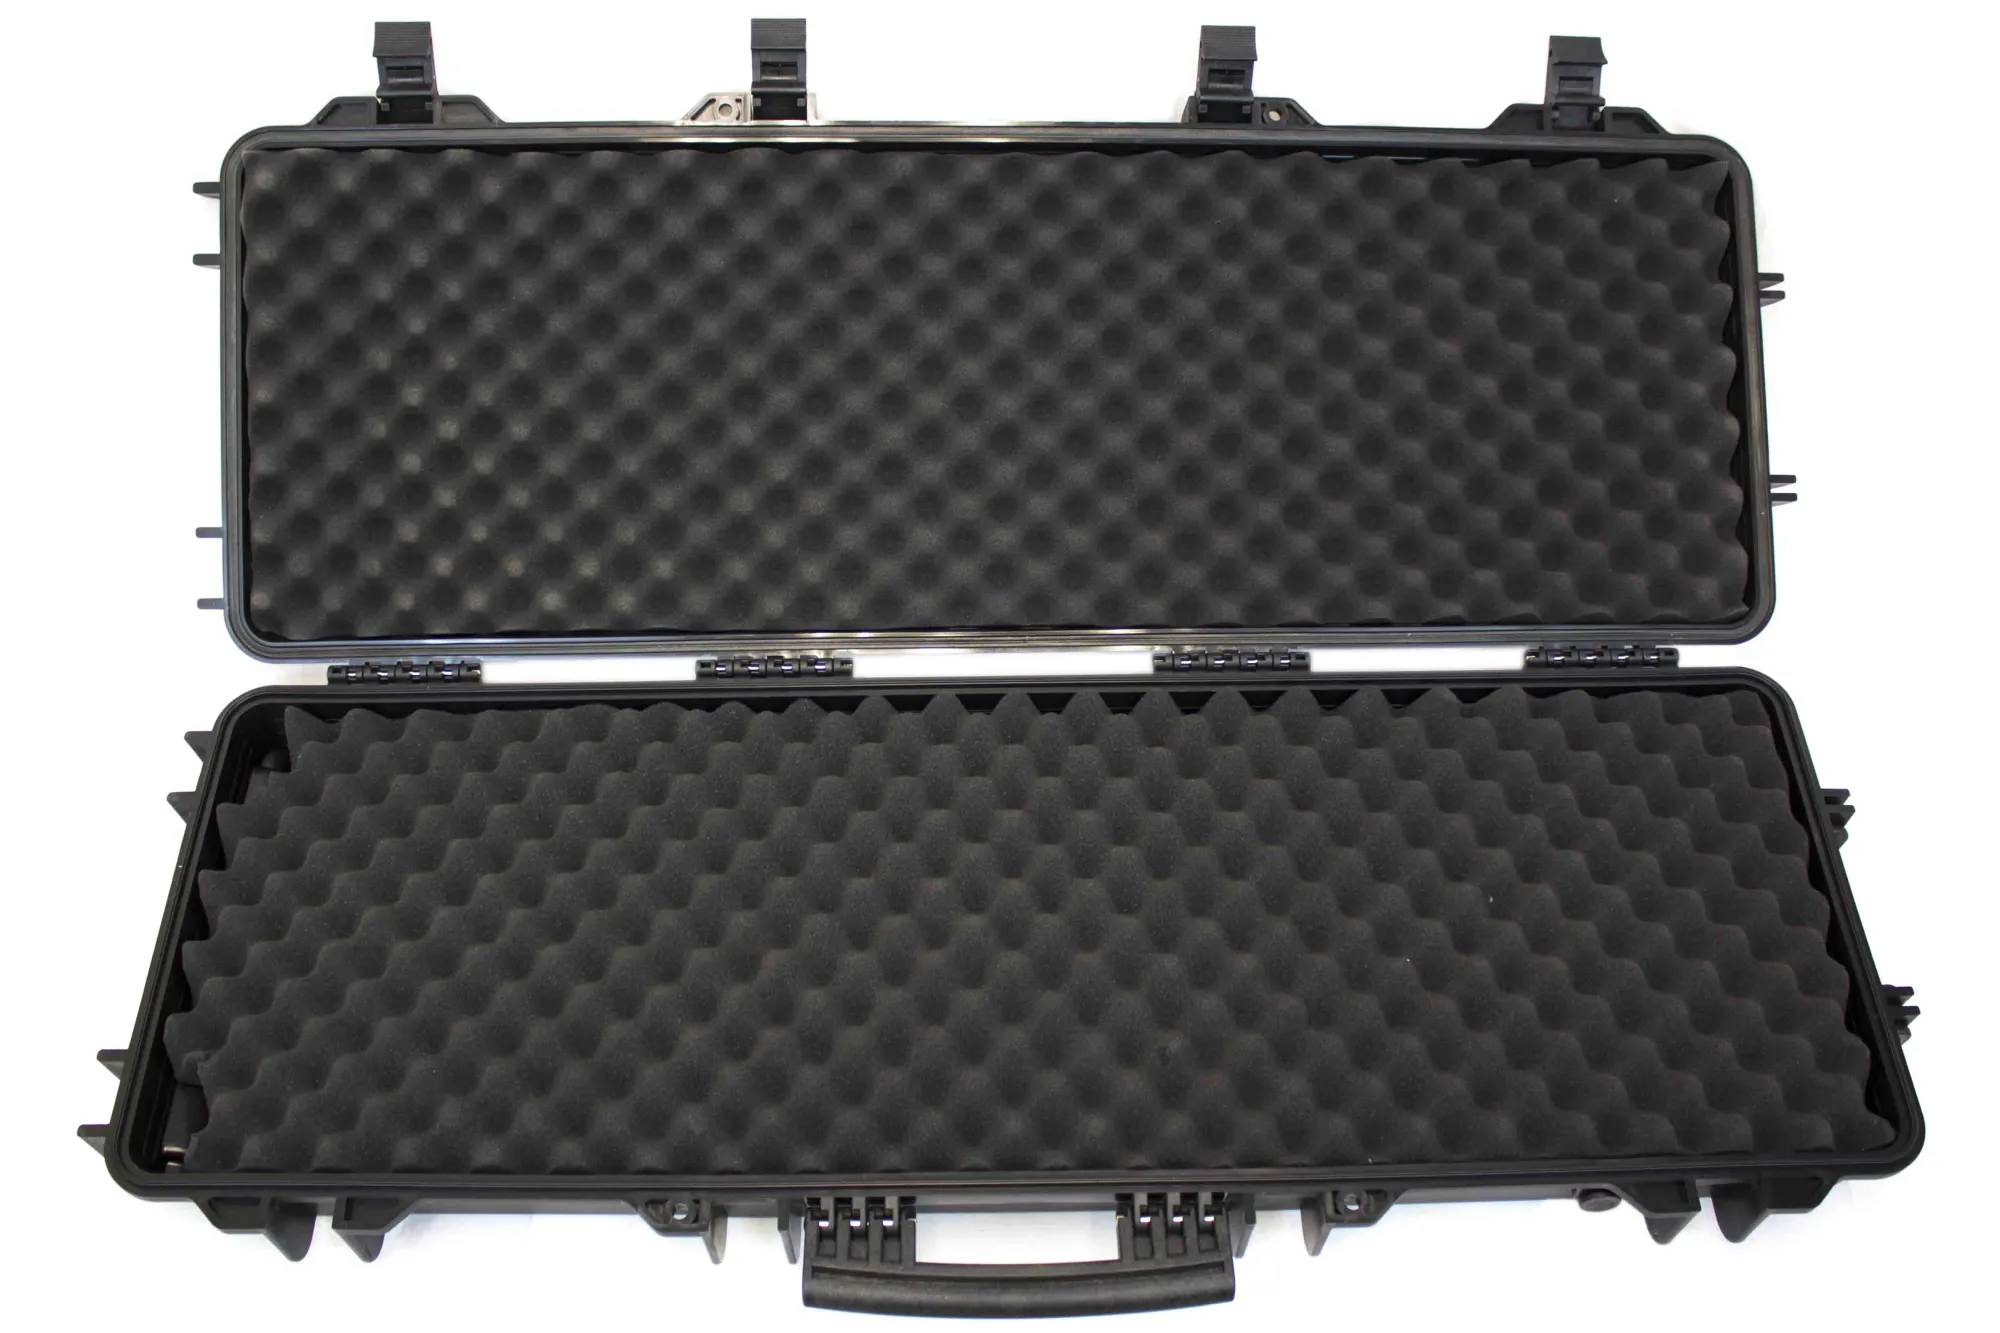 Best Hard Rifle Case to Buy in 2022